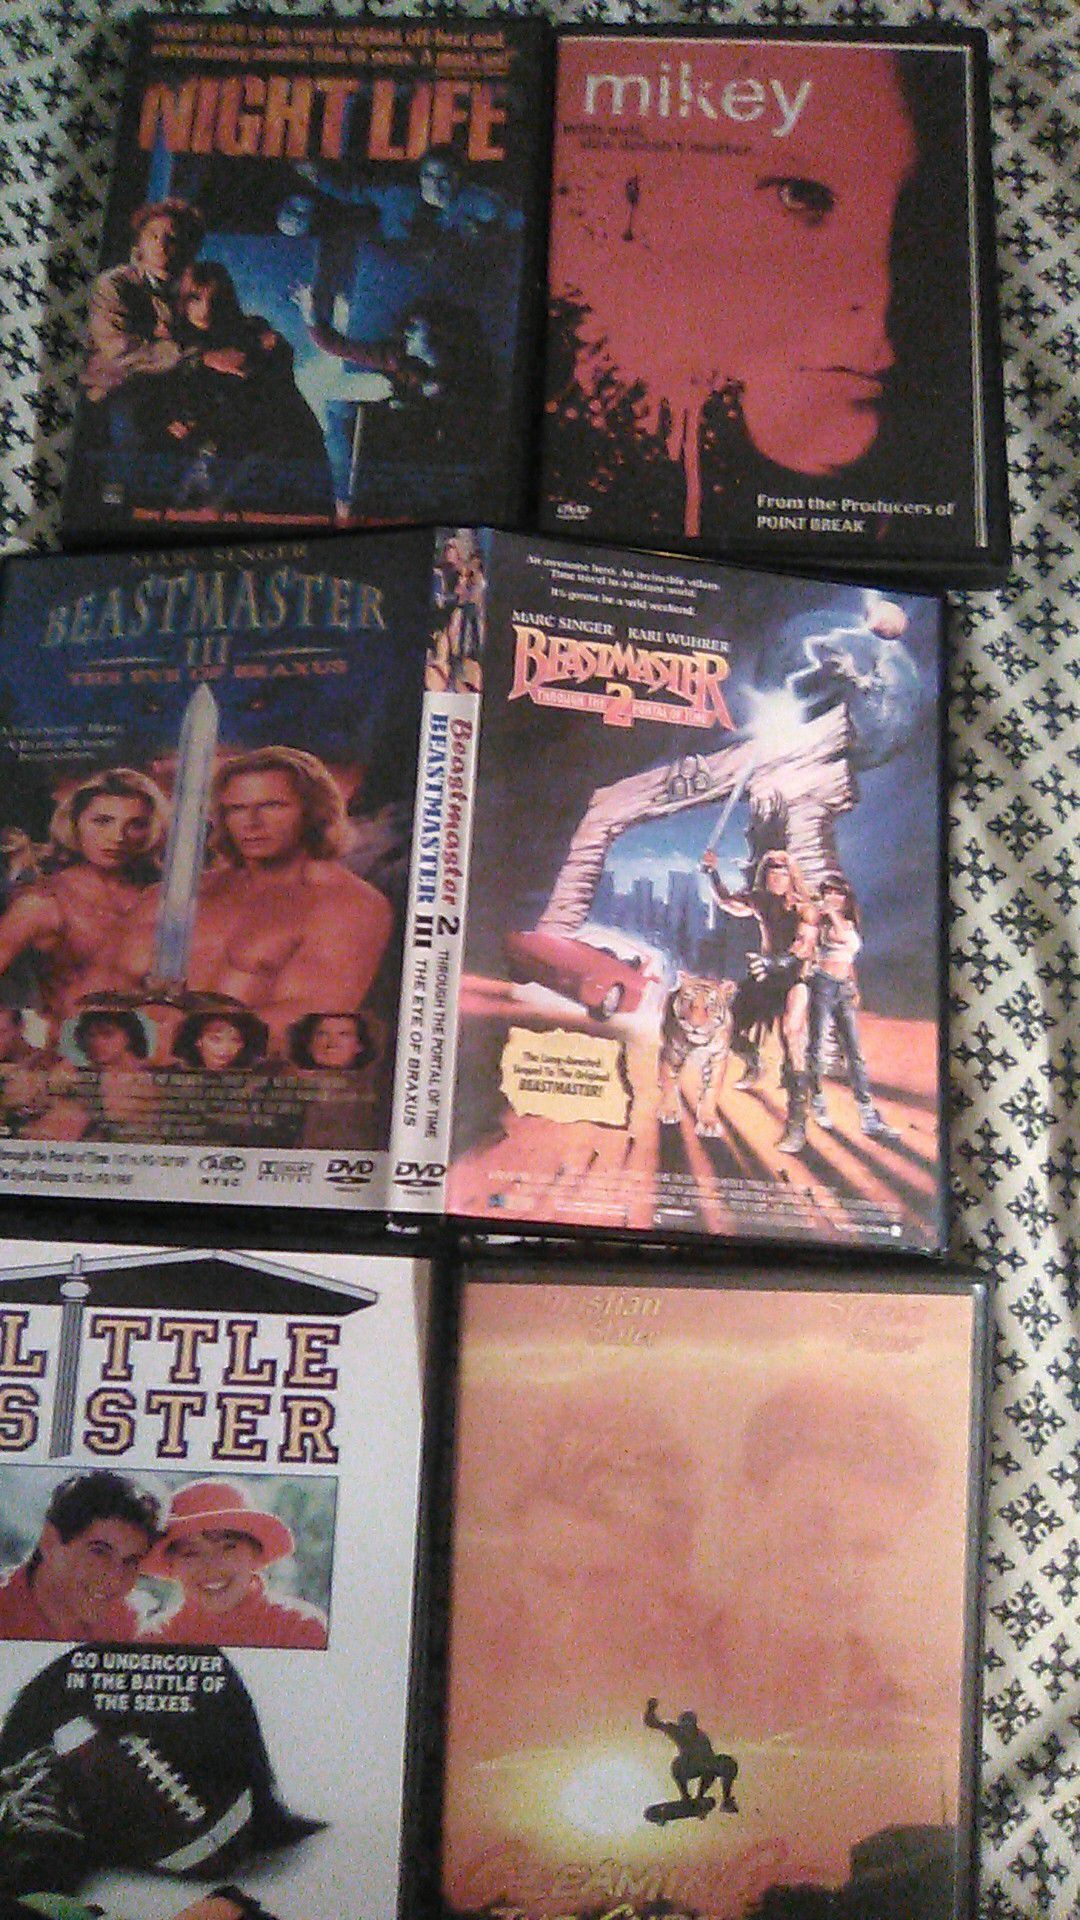 Various out of print DVDs